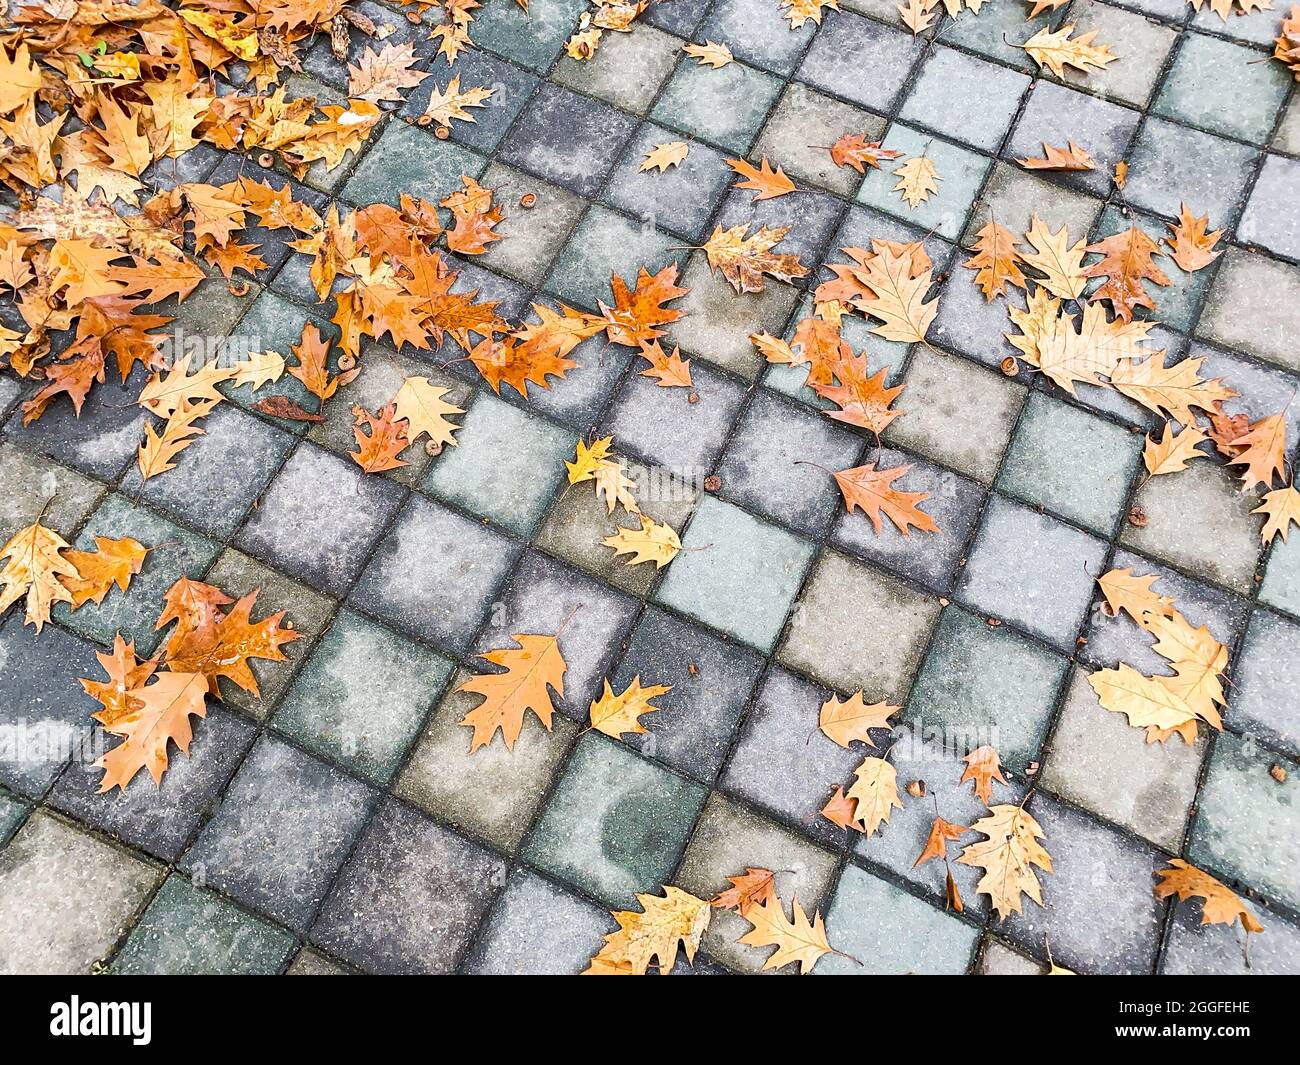 fallen colorful autumn maple leaves on wet gray stone pavement Stock Photo